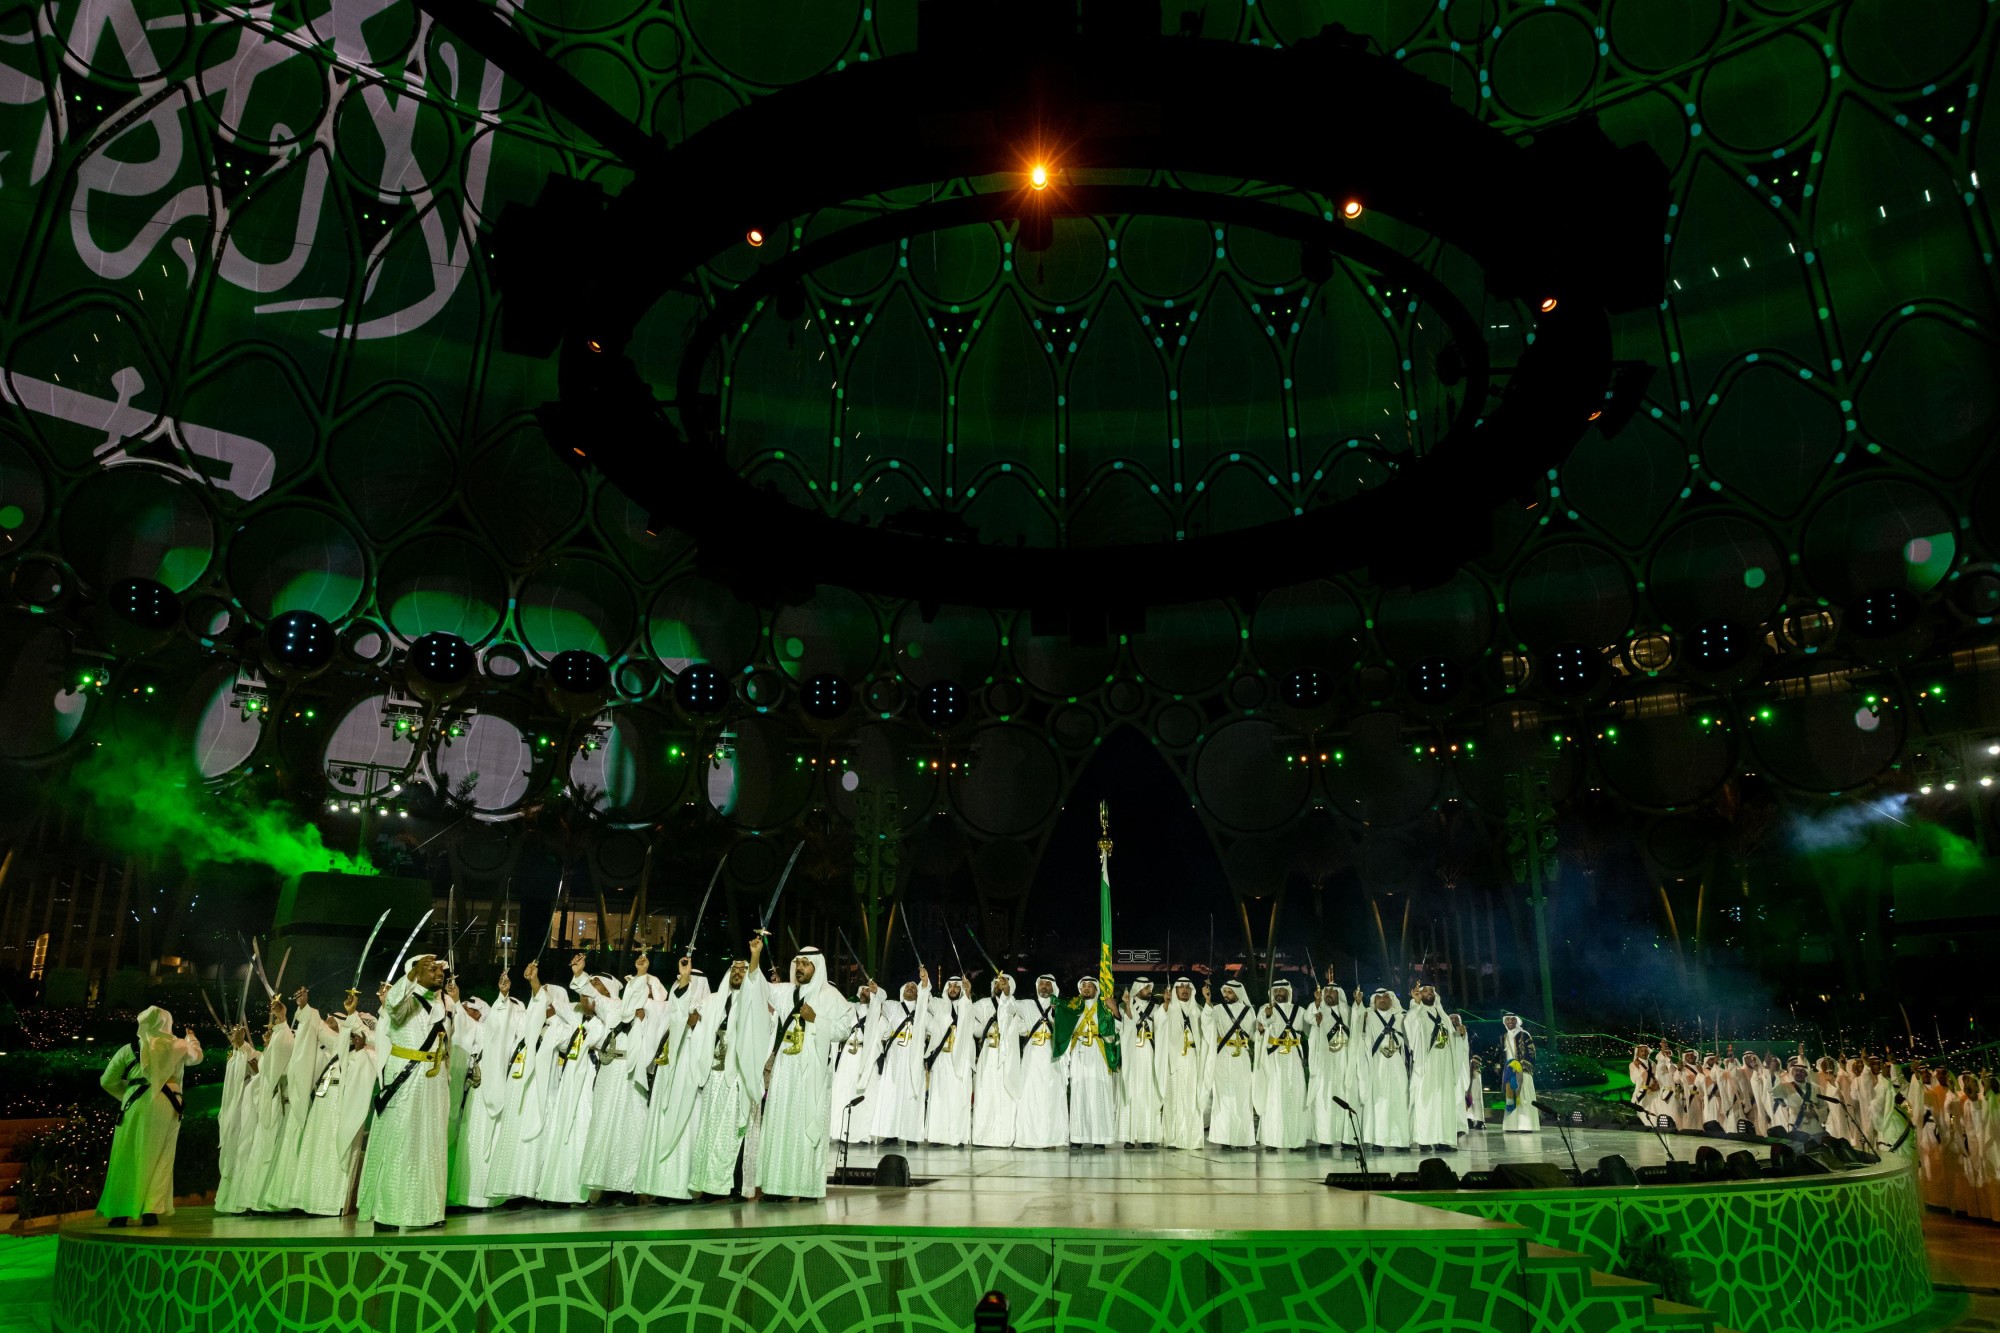 The Glory Musical Show at Al Wasl during the Kingdom of Saudi Arabia National Day m30467